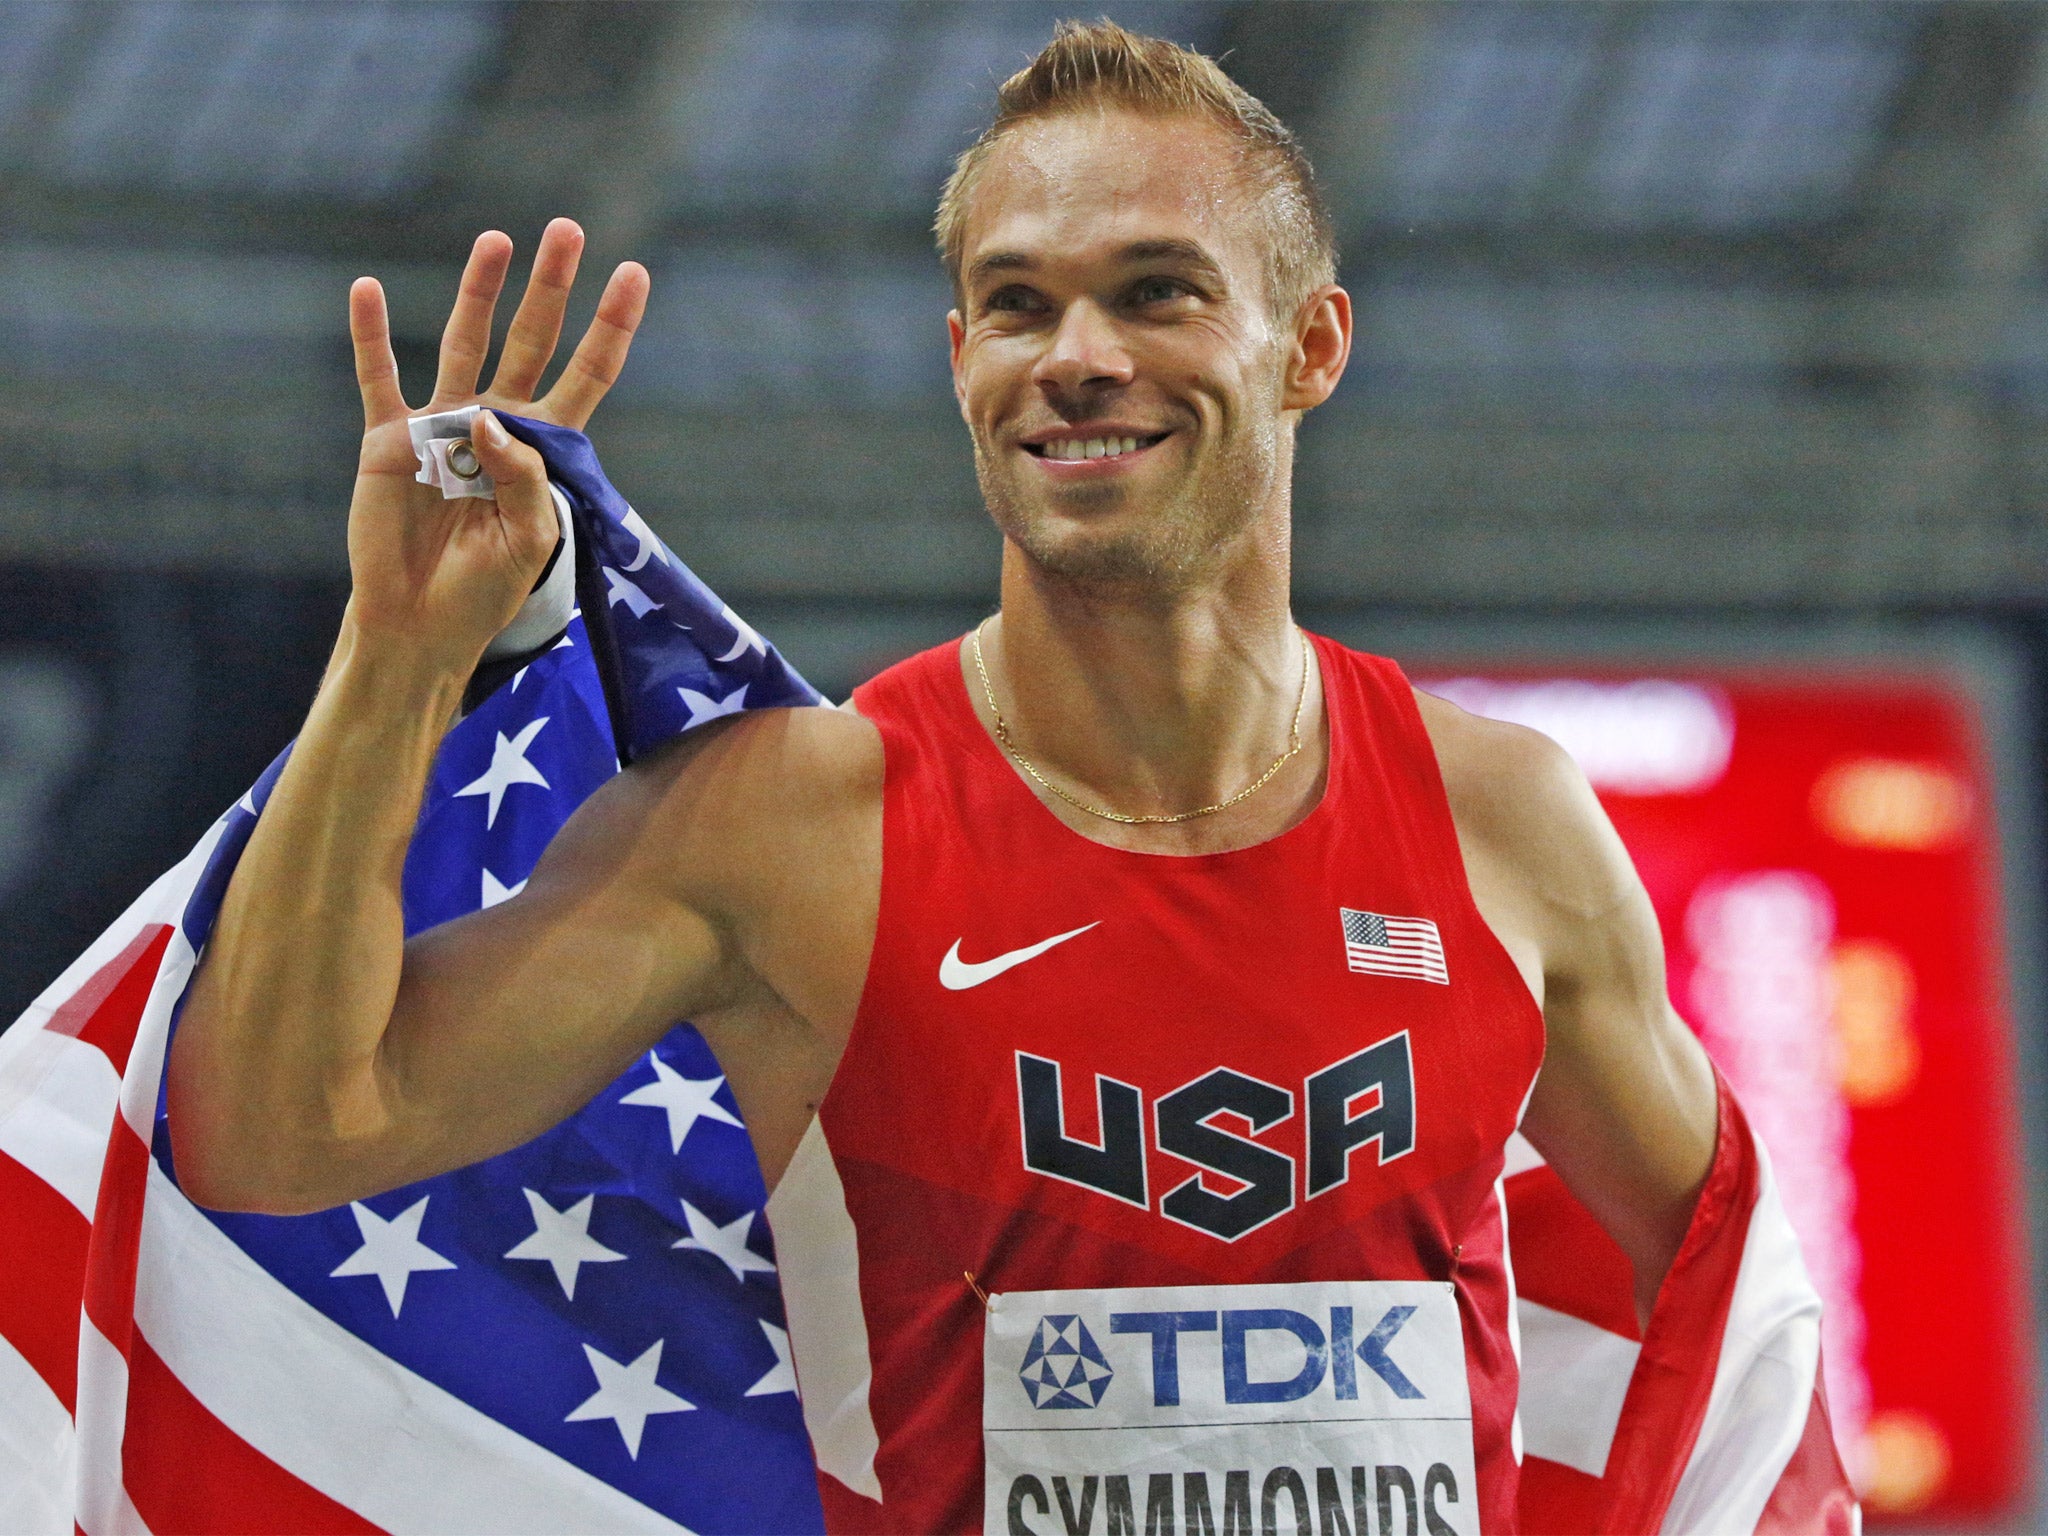 Nick Symmonds won a silver in the 800m